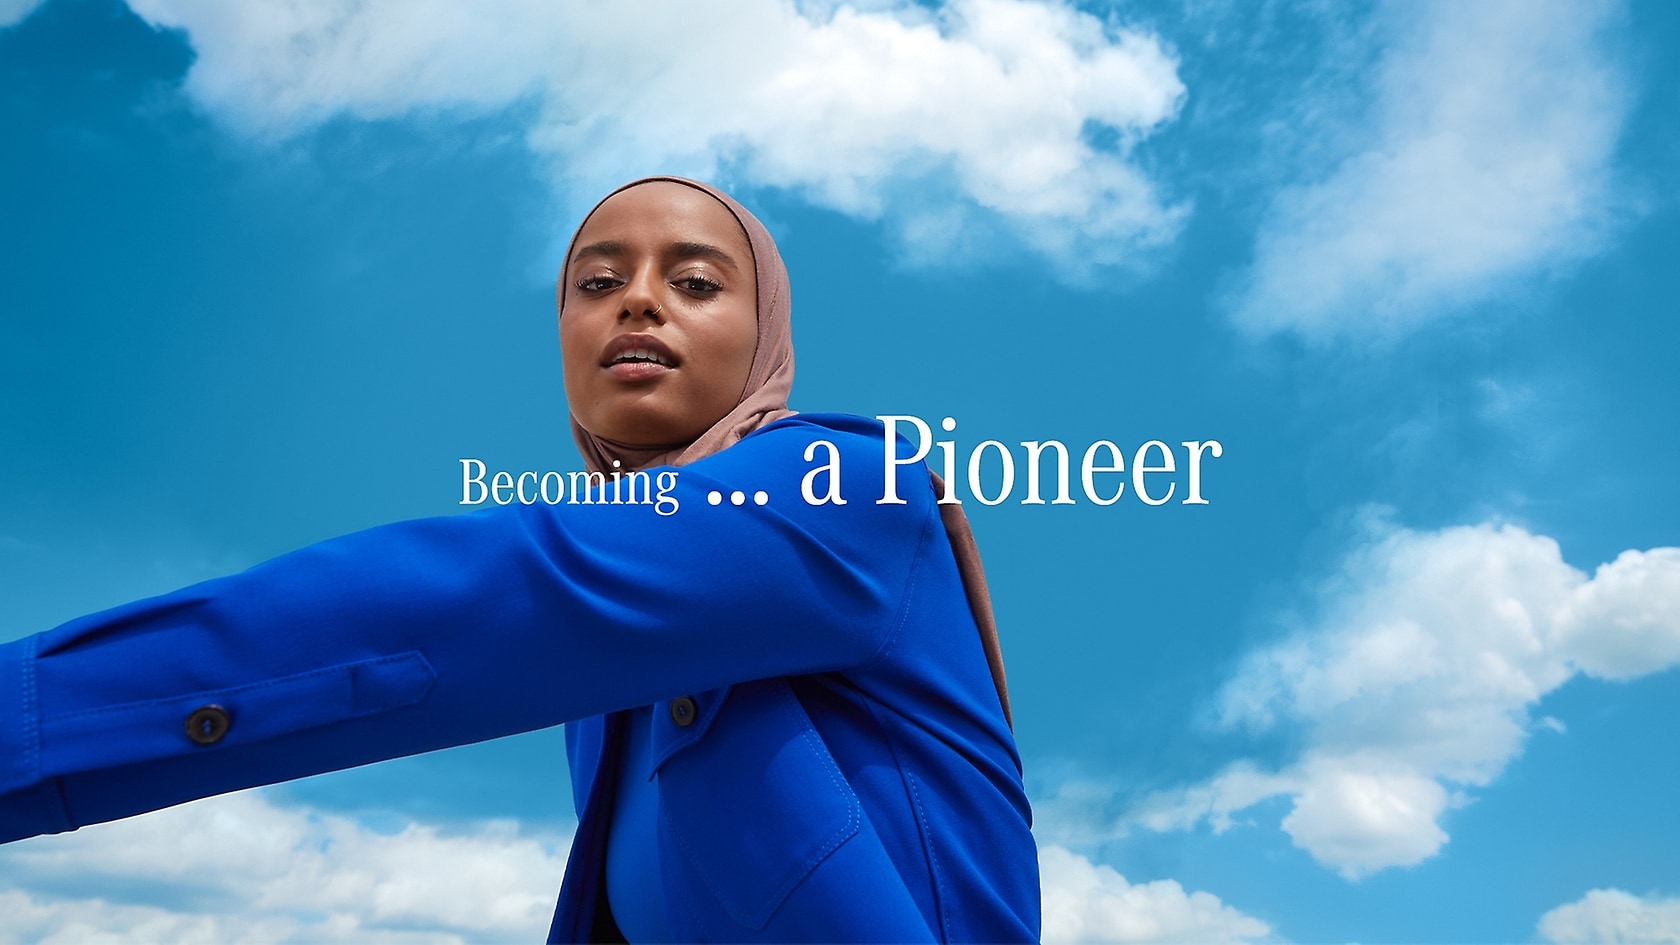 Becoming... a Pioneer